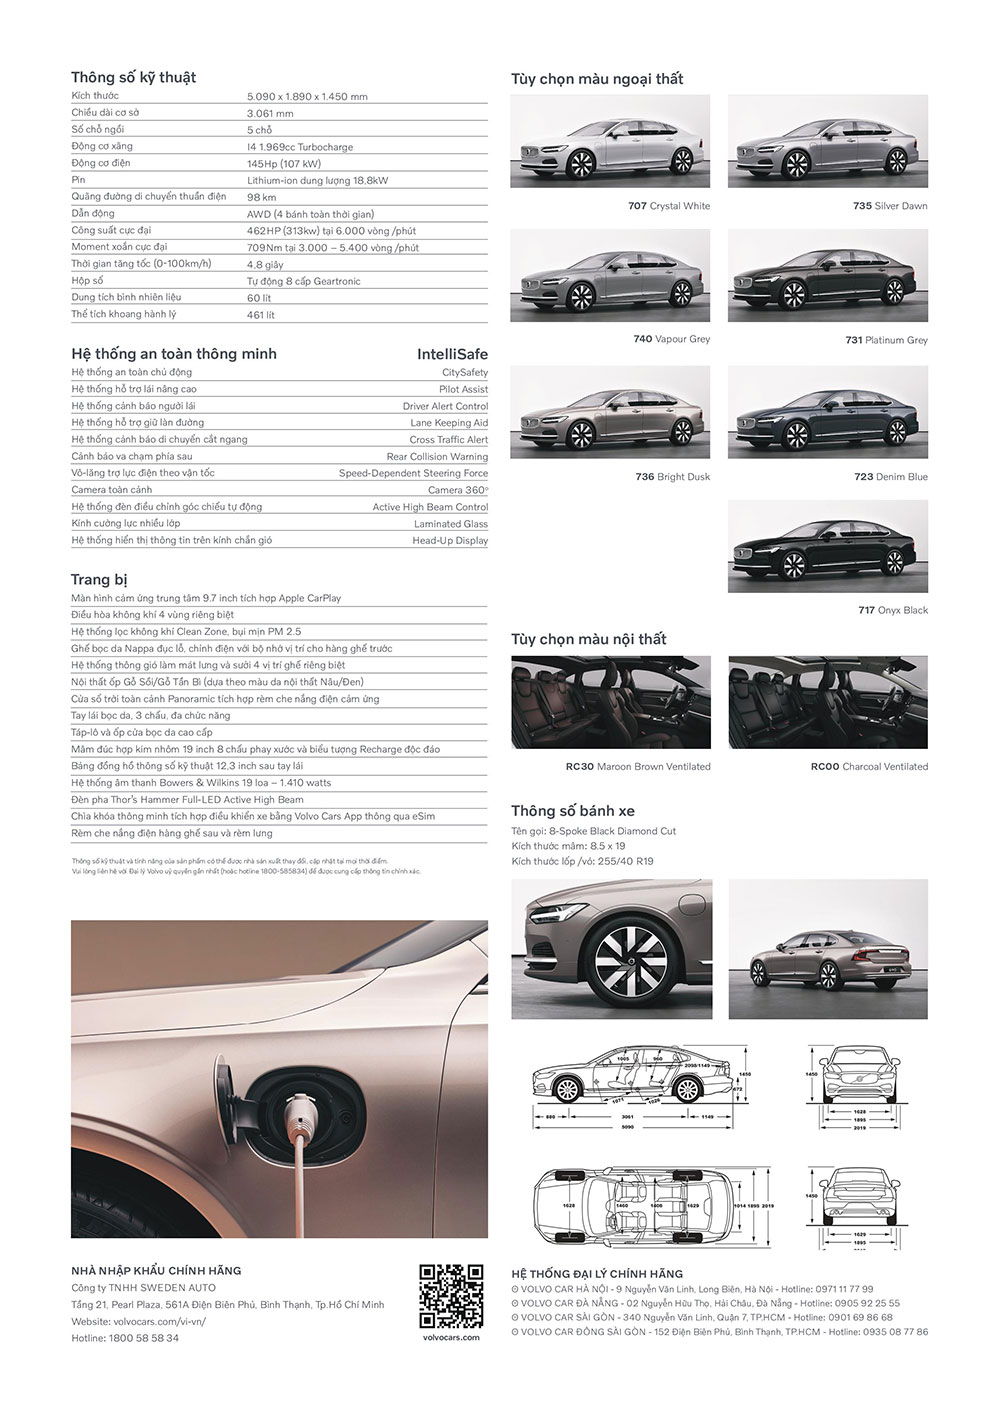 S90 Recharge brochure 6 pages trang hinh anh 6